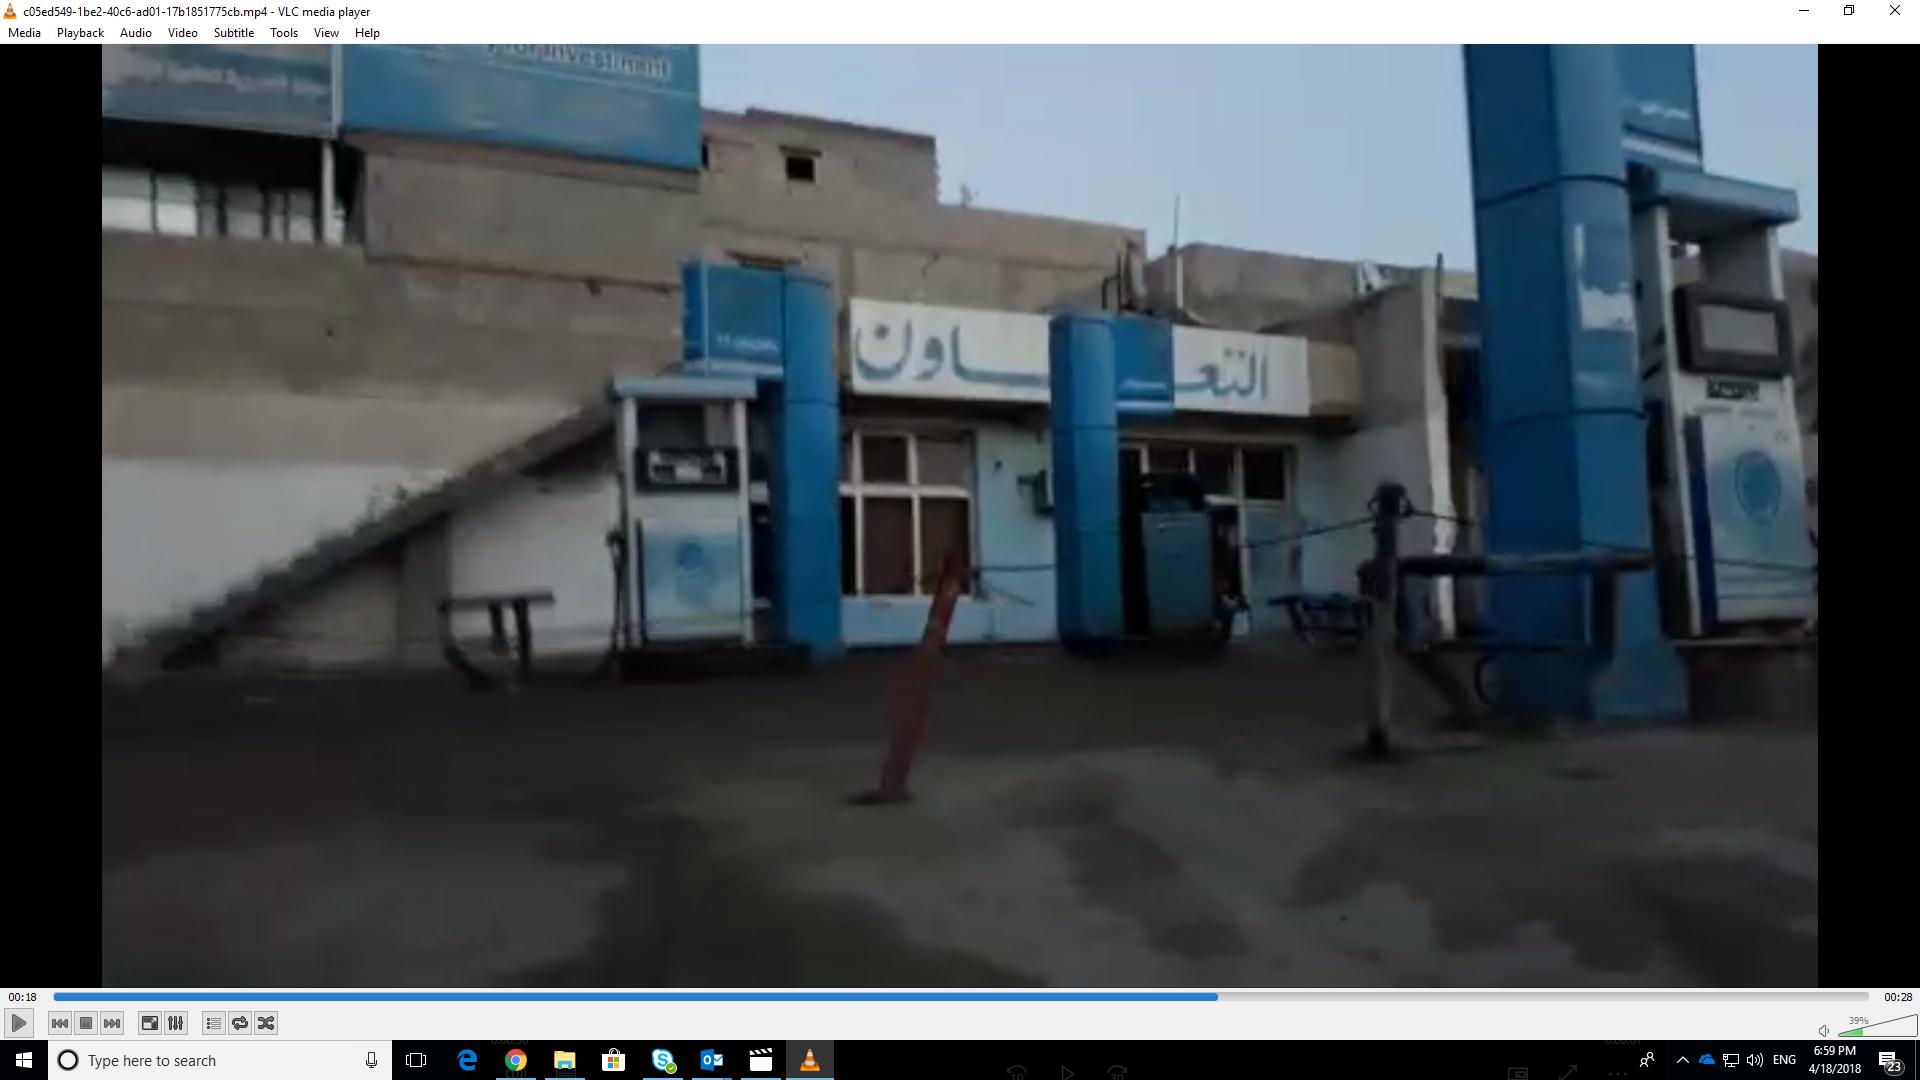 Still image from a video provided to Human Rights Watch by a Sinai activist and captured on February 27, showing one closed gas station in al-Arish.